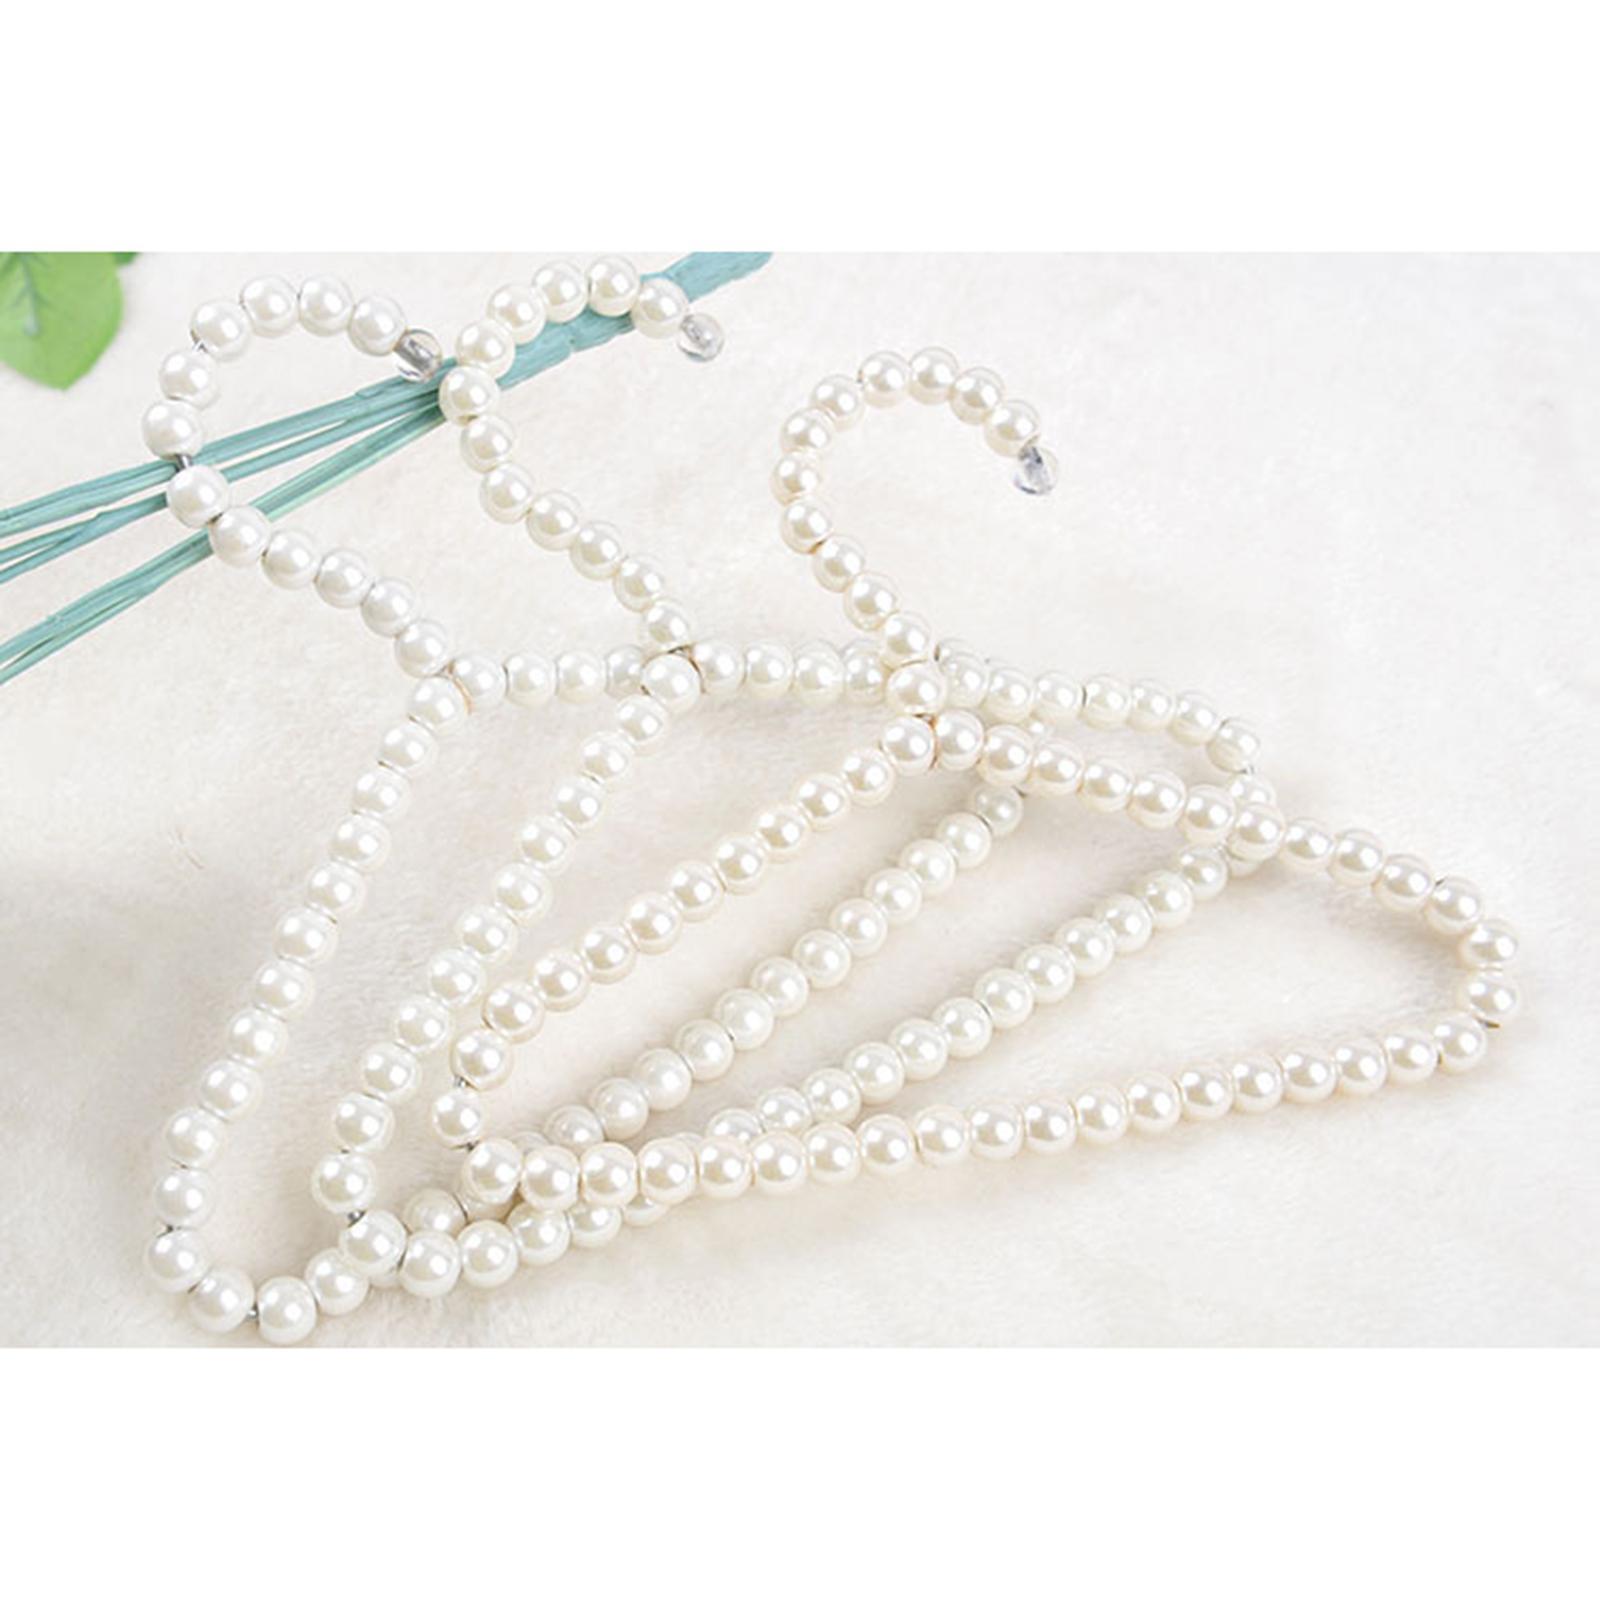 Pearl Beads Clothes Hanger Elegant Small Metal Hanger for Pets Baby Kids